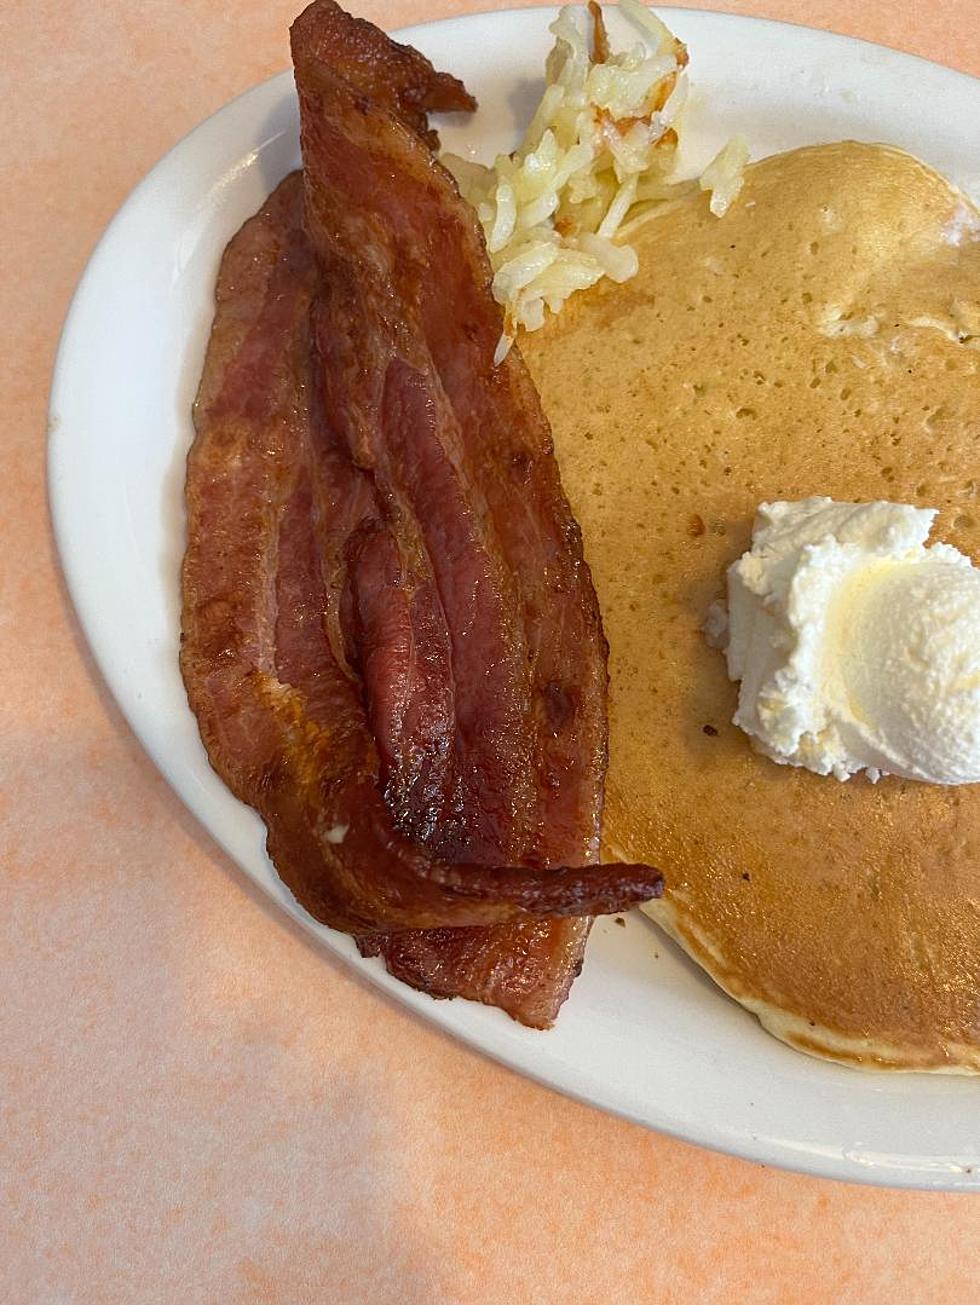 11 Of The Best Breakfast Spots In Western Colorado You Must Visit Once